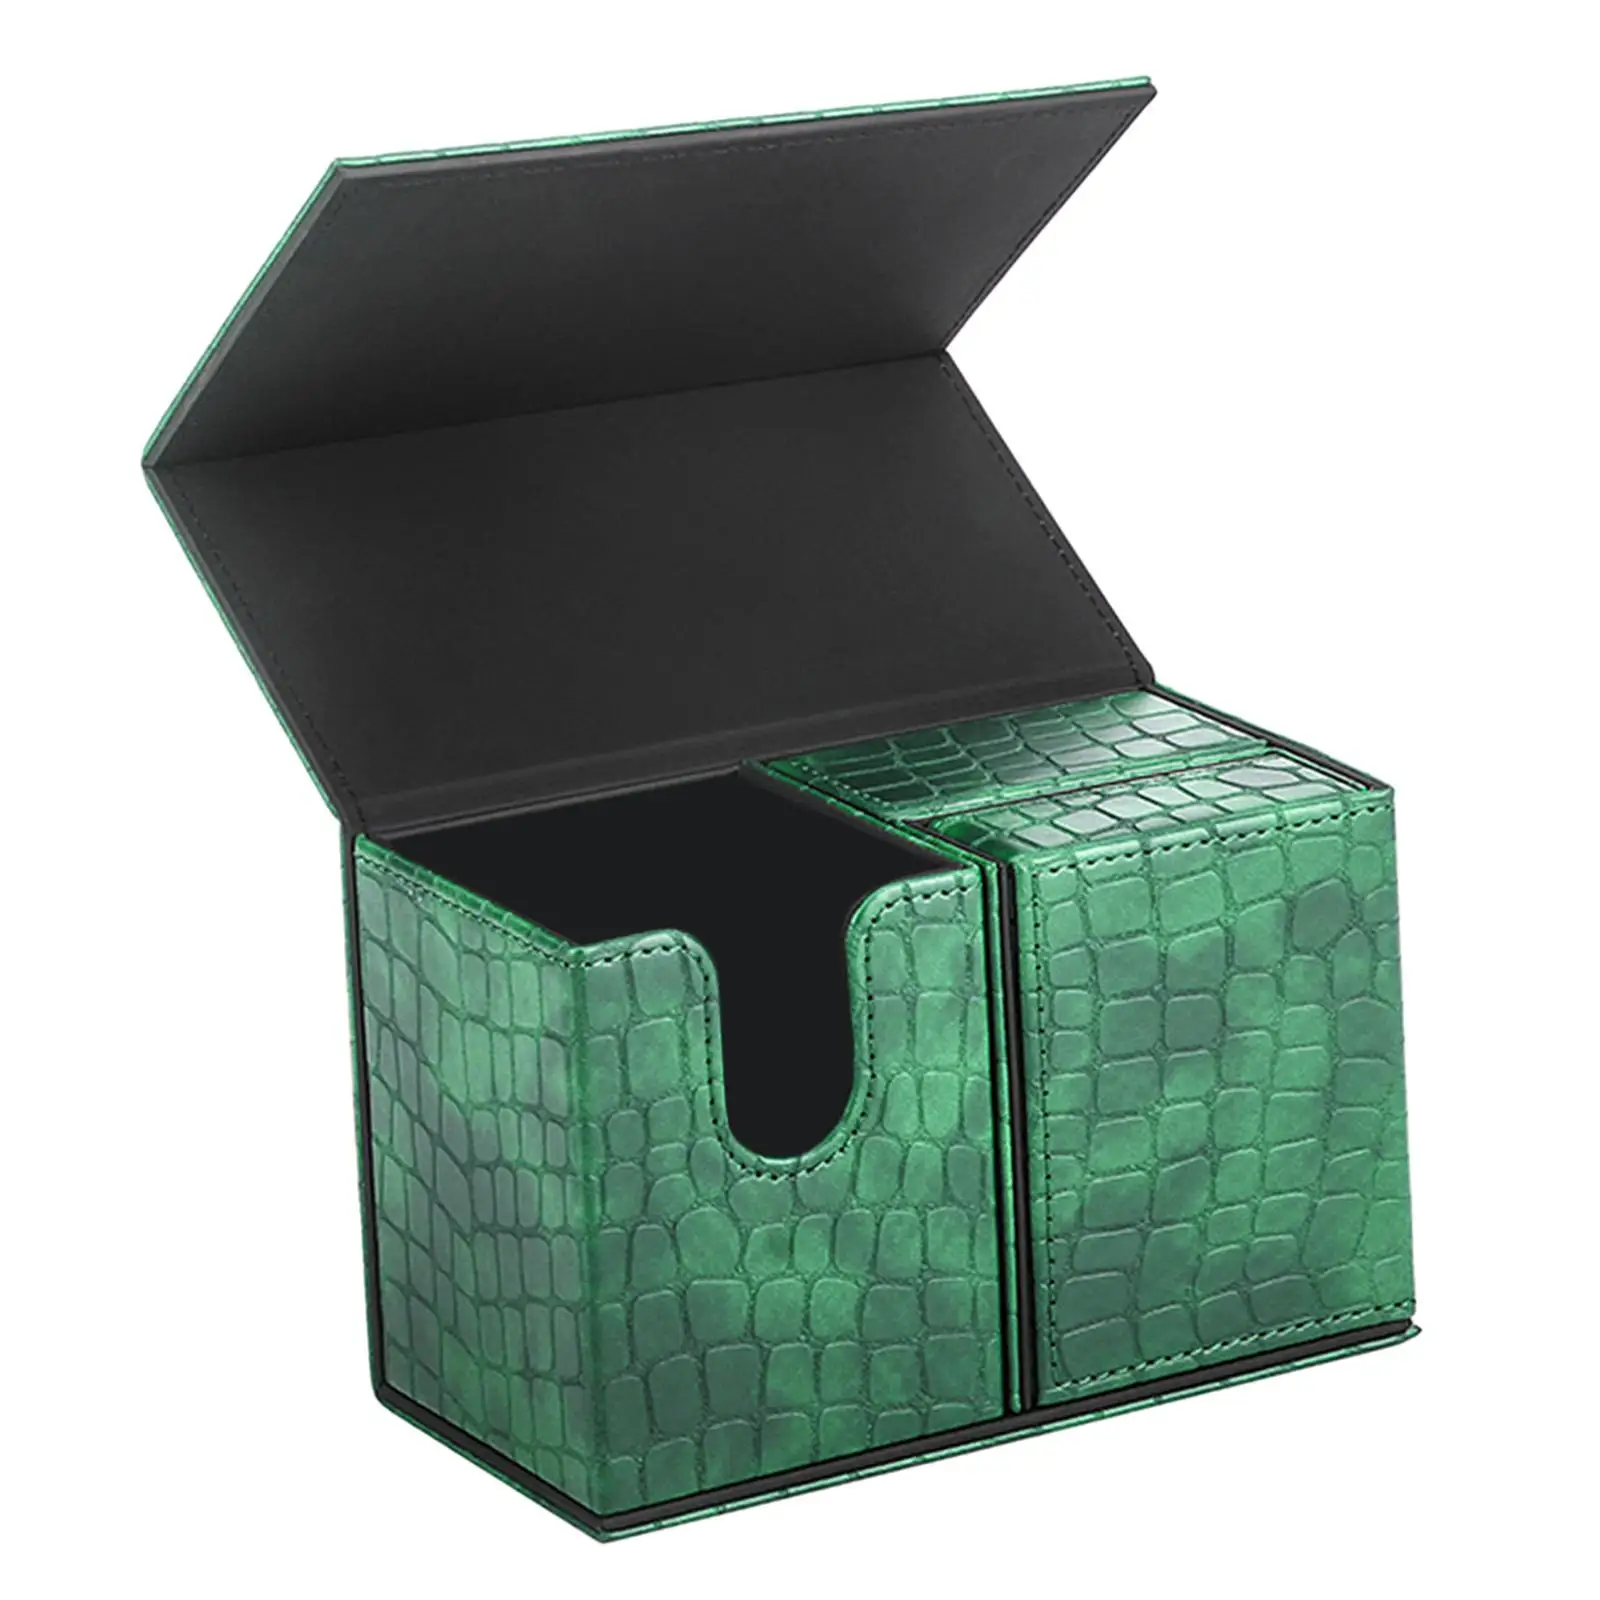 Sturdy Trading Card Deck Box Organizer Holder Case Storage Container for TCG